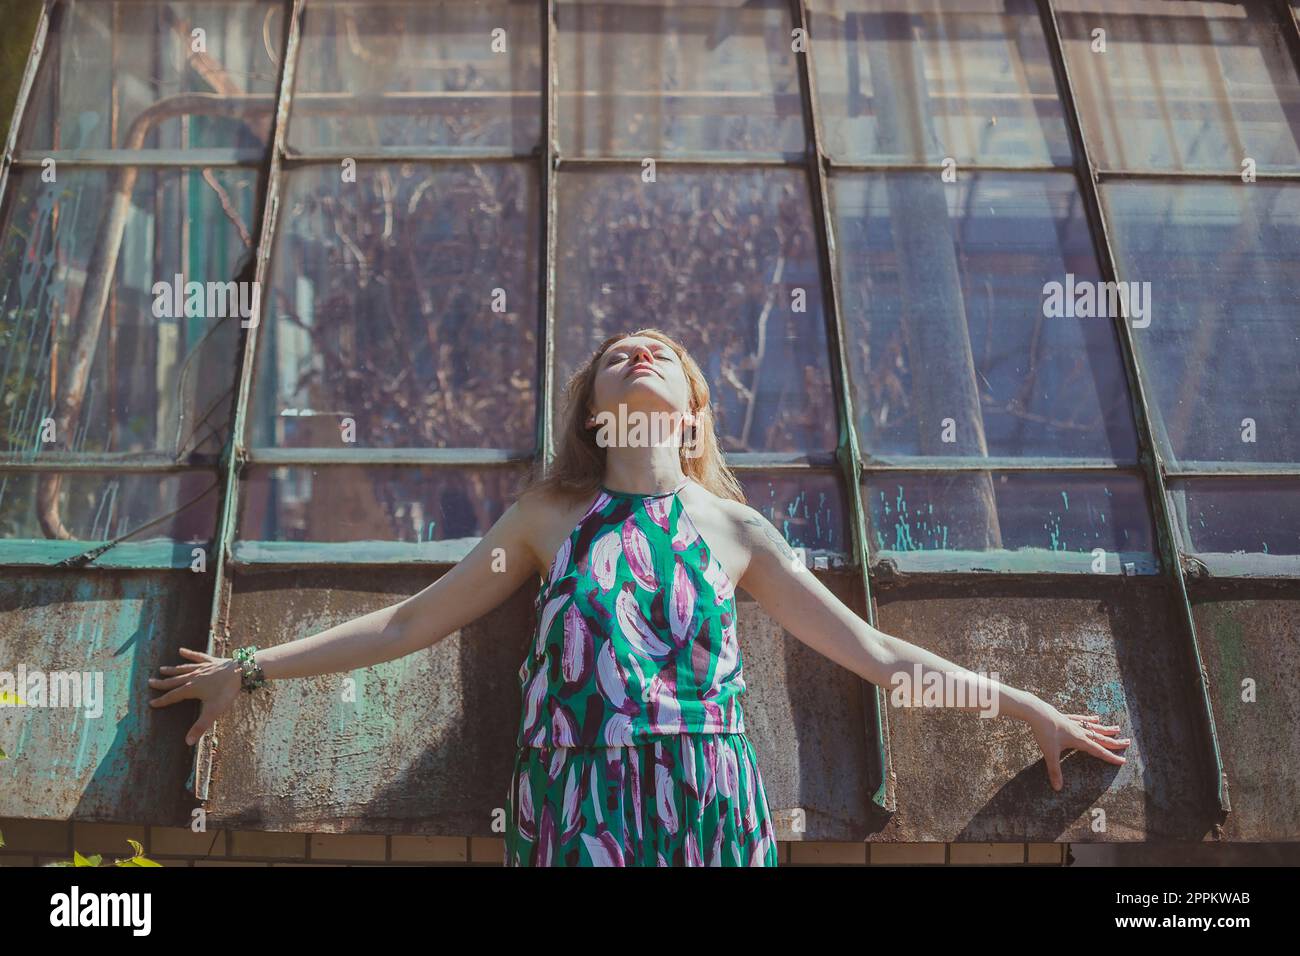 Young woman with closed eyes posing against tall windows scenic photography Stock Photo